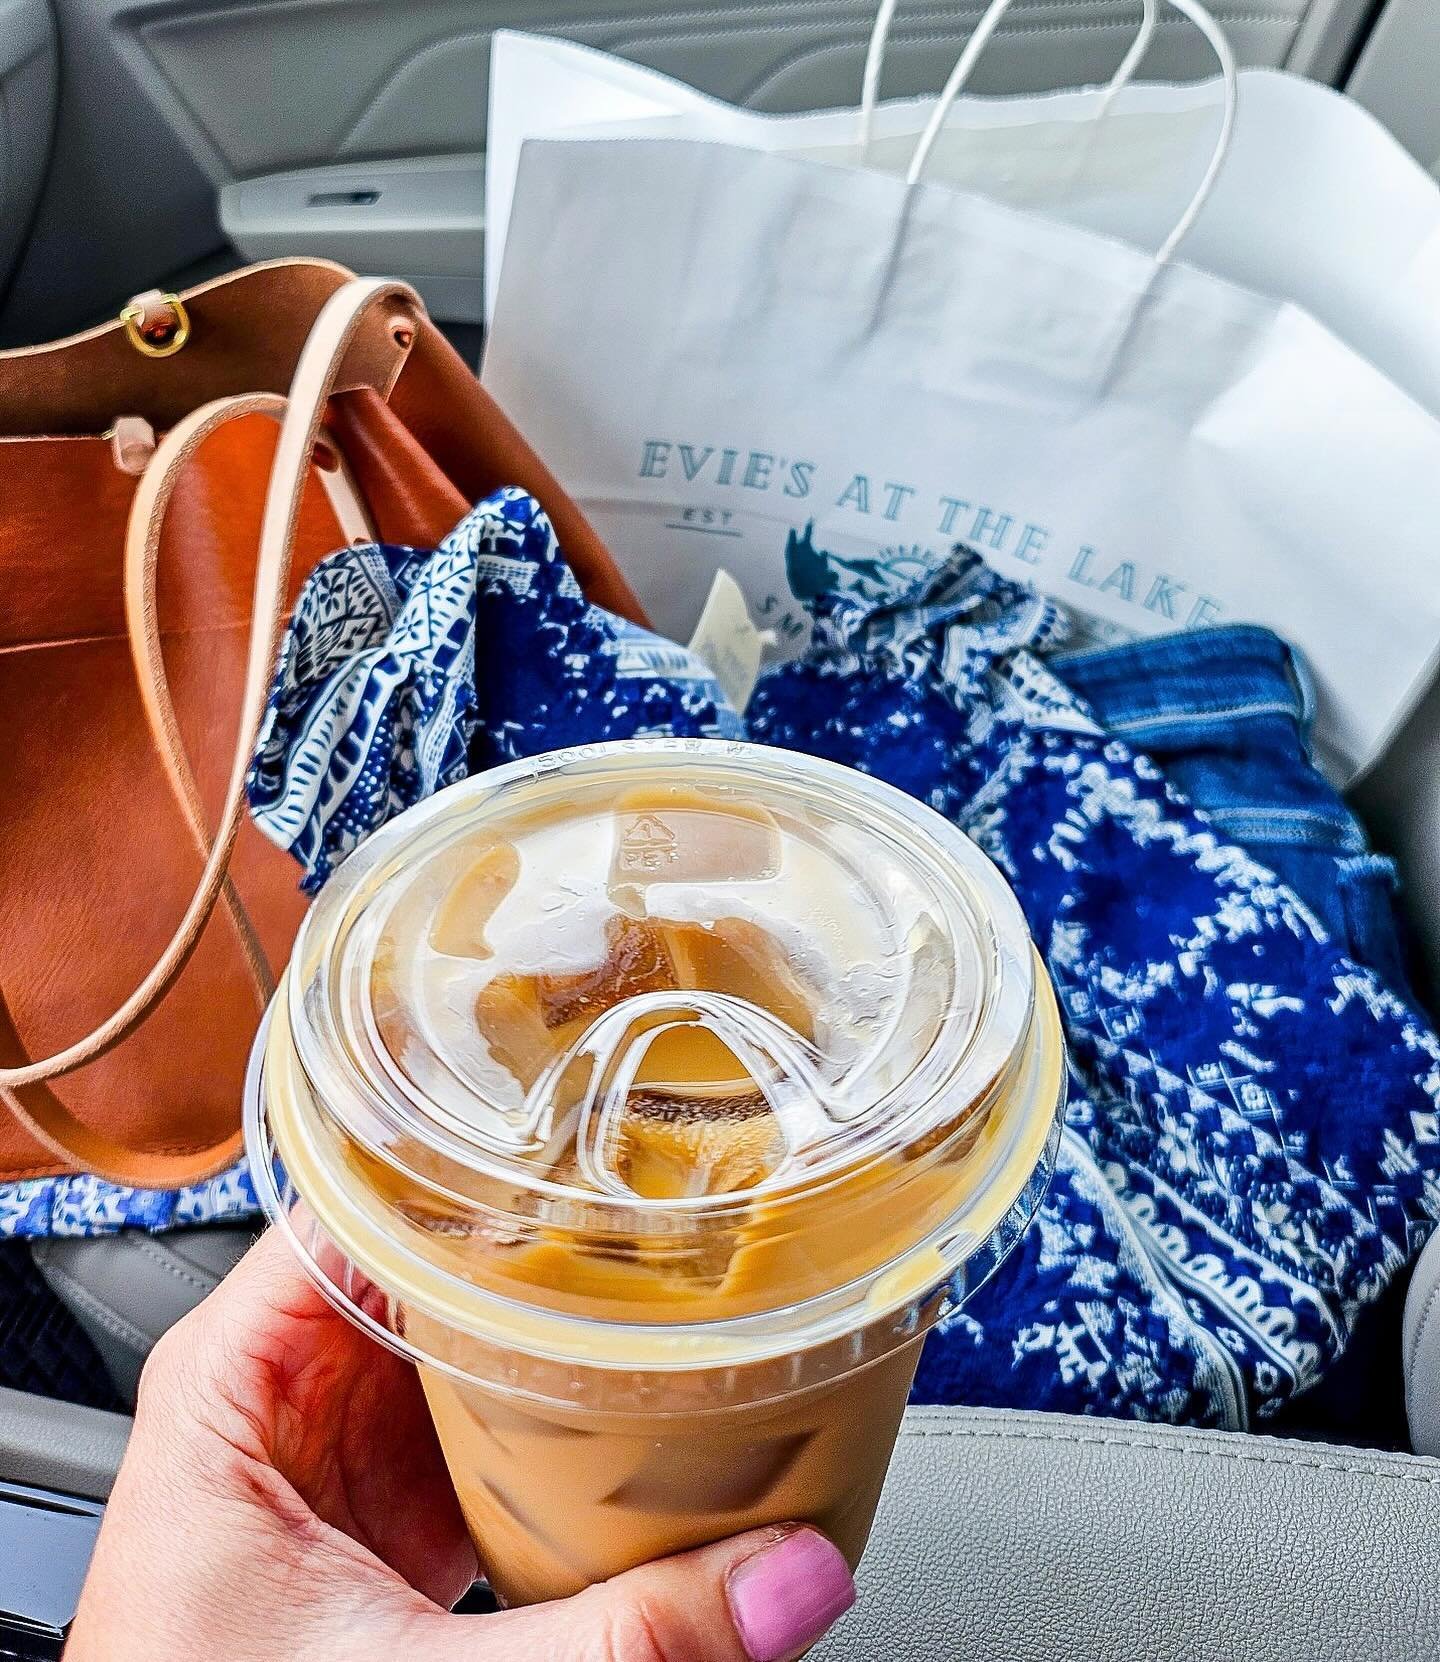 Mondays are for heading to our @eviesatthelake location, grabbing a coffee, and browsing all of our new spring arrivals!  The one day we&rsquo;re closed you can STILL shop&mdash; their hours are 8-5pm! ☕️ 🛍️ ✨